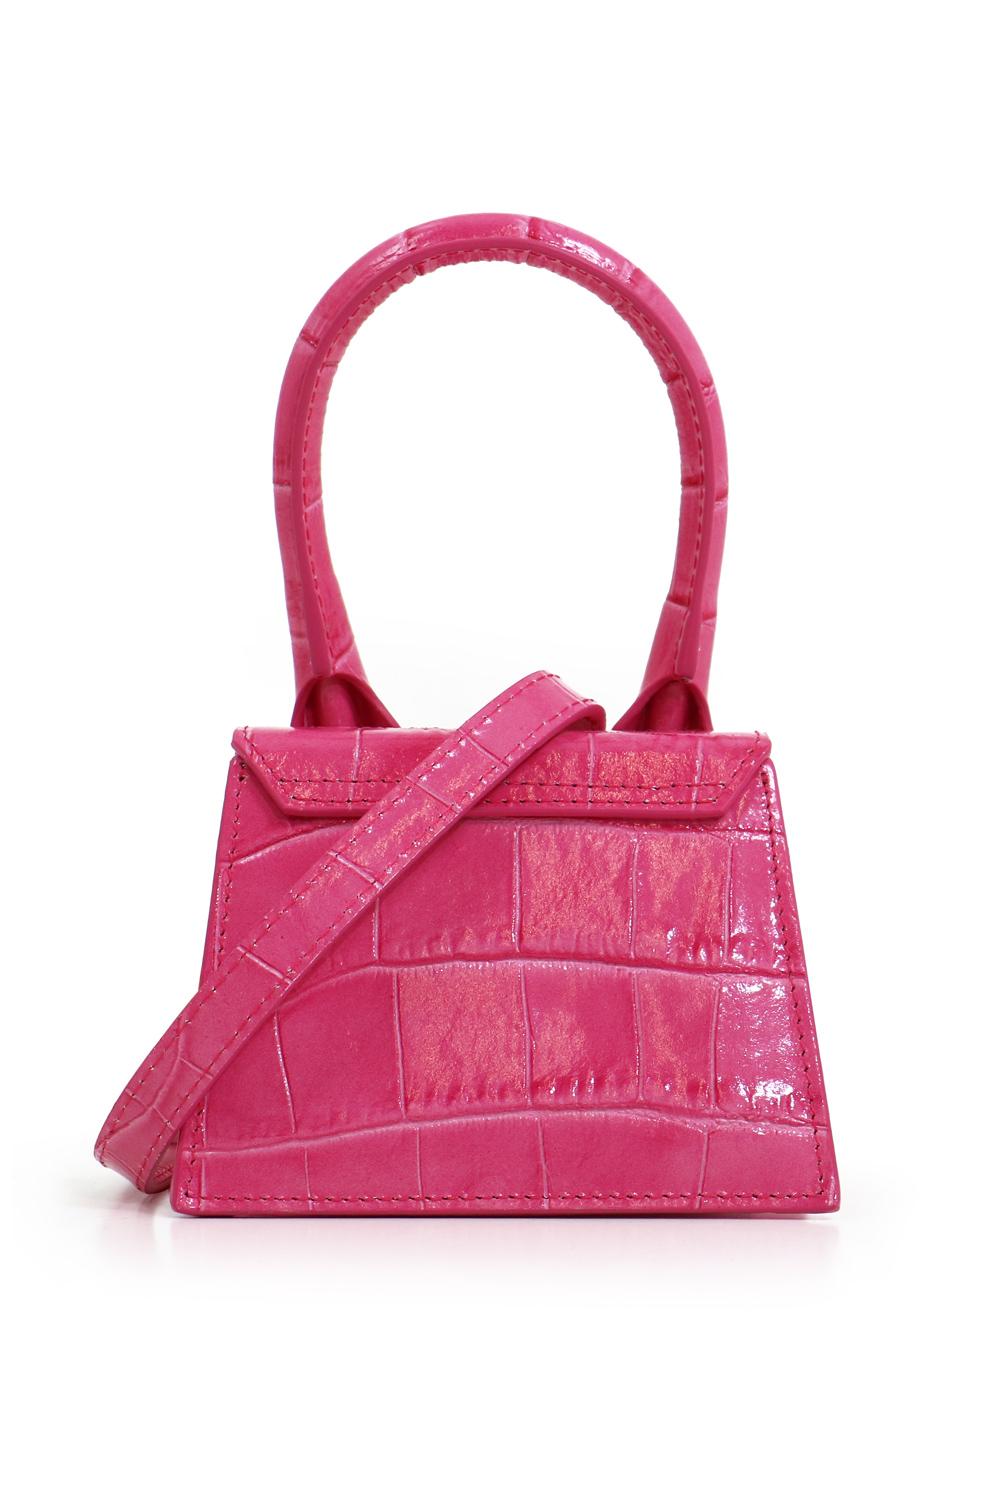 Jacquemus Le Chiquito Leather Mini Bag in Pink - Lyst